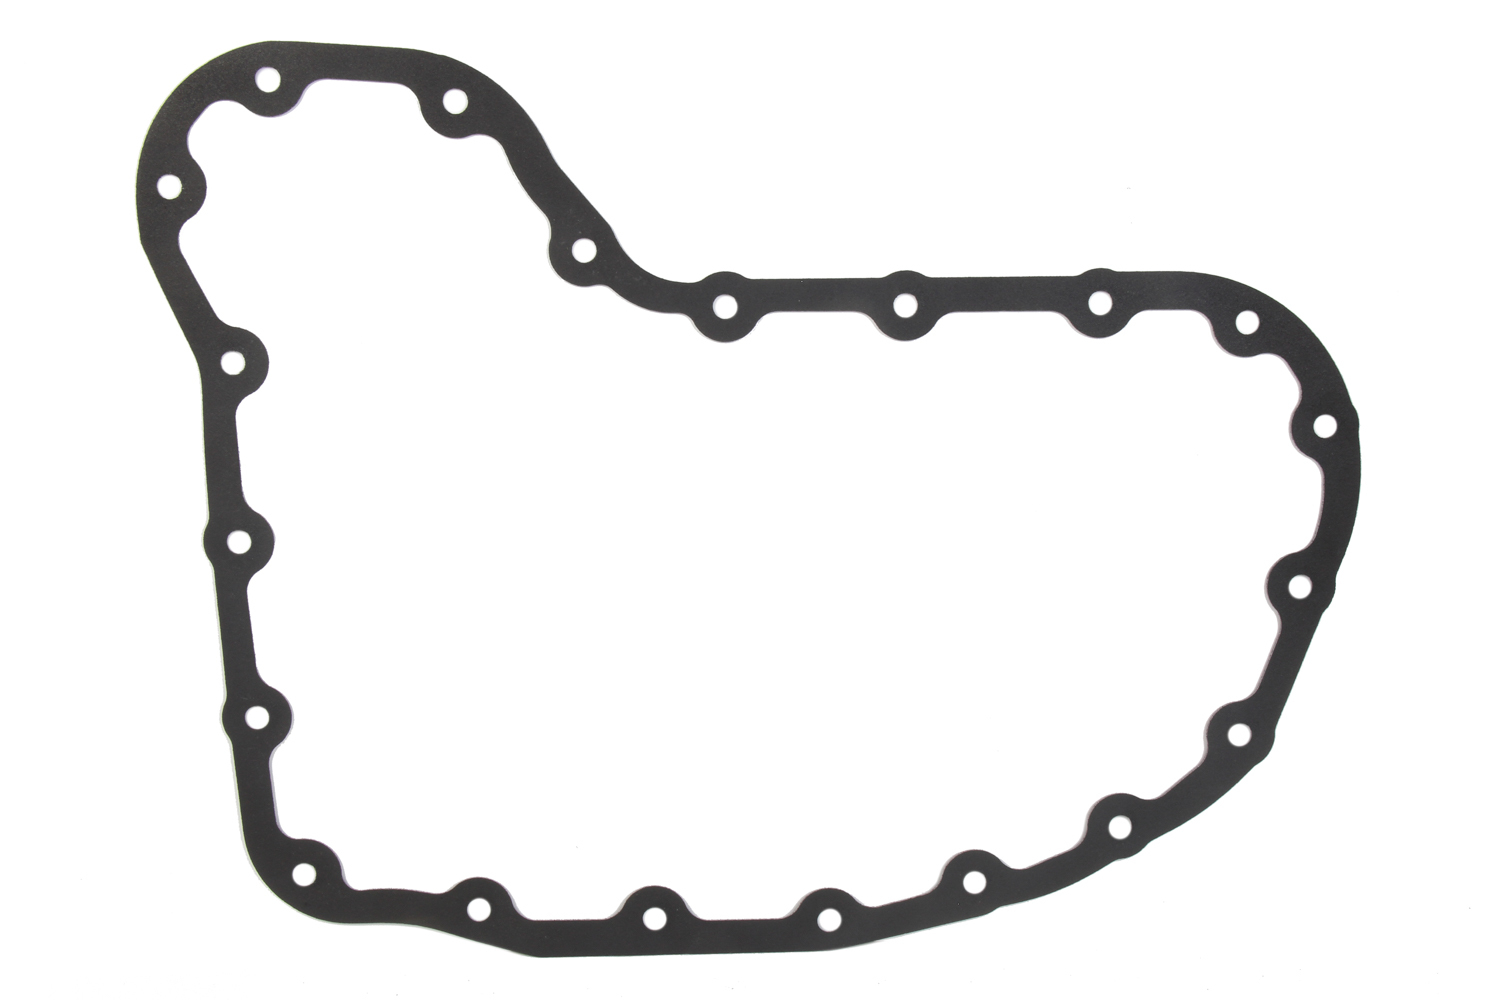 Cometic Gaskets C14113-060 - Oil Pan Gasket, 0.060 in Thick, 1-Piece, Rubber Coated Aluminum, Toyota V6, Each